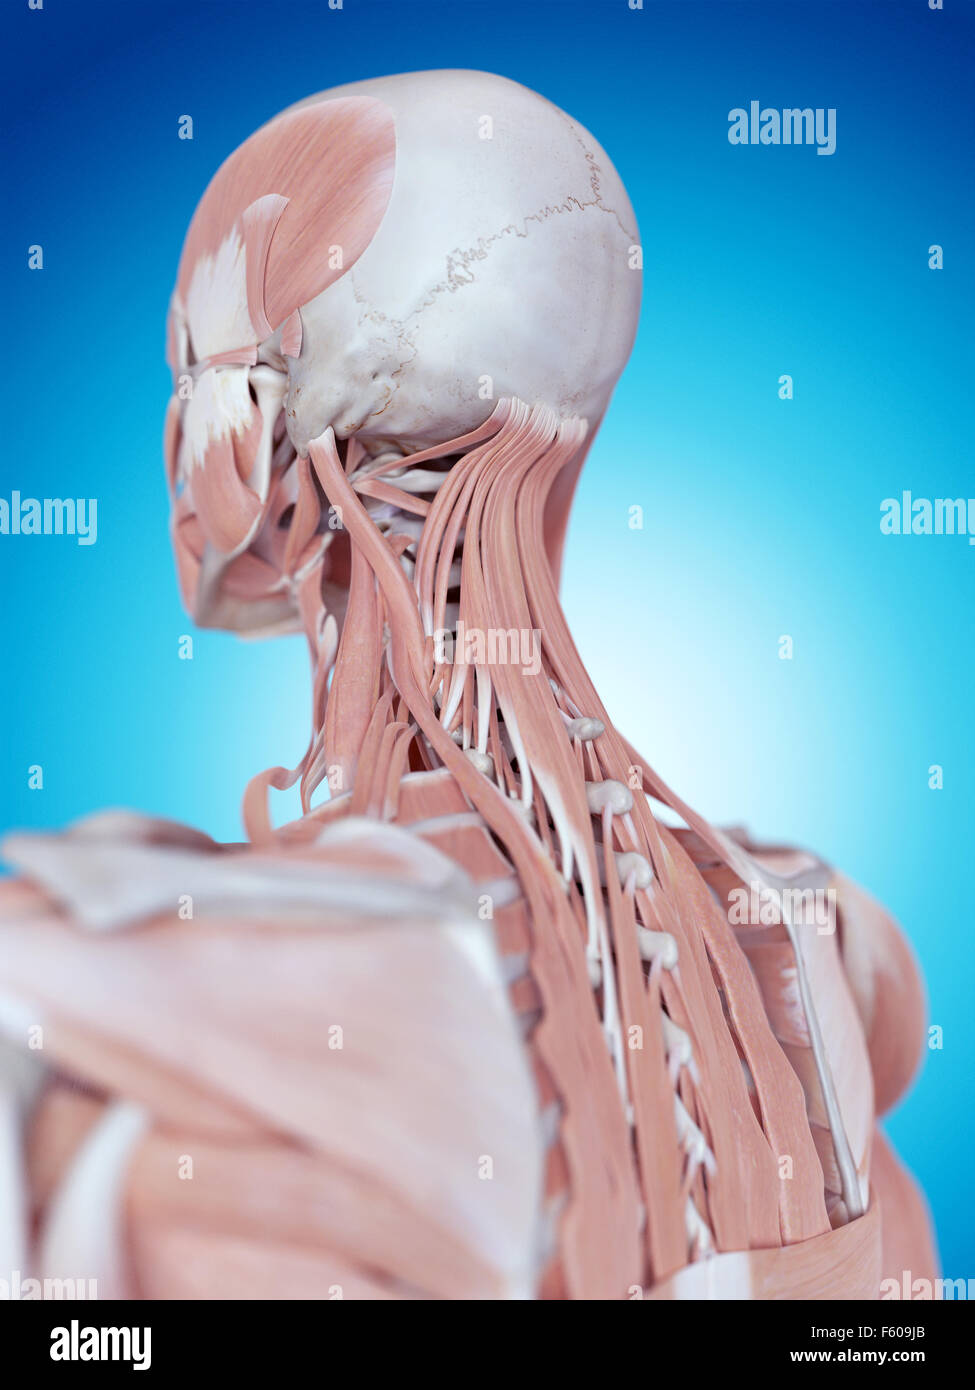 medically accurate illustration of the neck anatomy Stock Photo